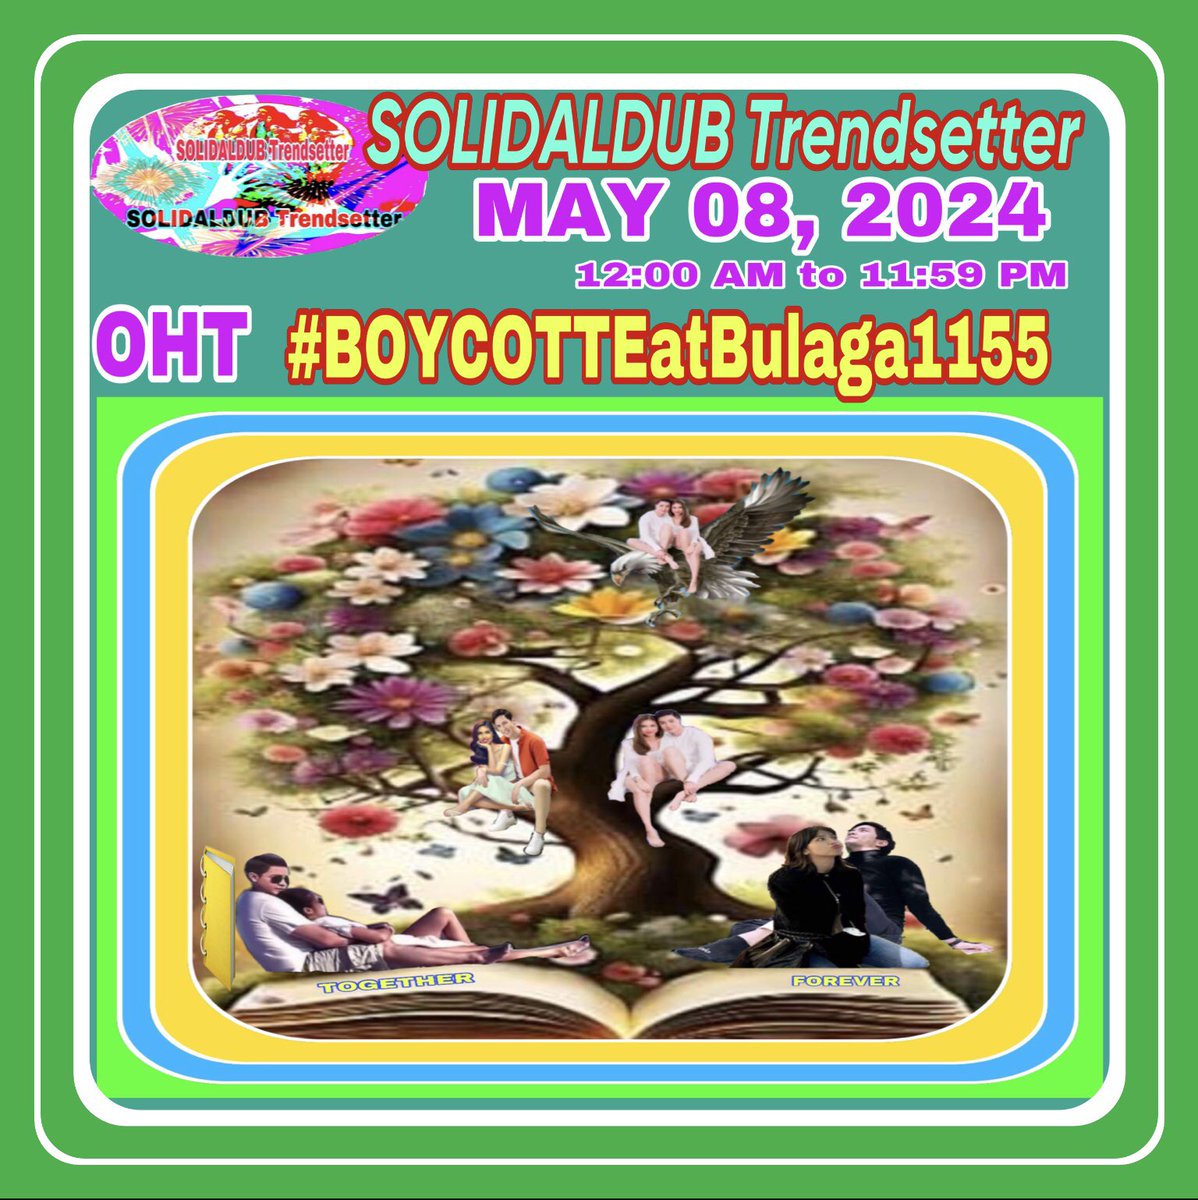 Even with d tremendous obstacles faced, TBADN will continue d fight til everyone involved in d zarsuela acknowledges d TRUTH about ALDUB & ALDUBNATION. We r a FANDOM - a FANMILY that vows 2 support, love & protect ALDUB ALDUB PA RIN #BOYCOTTEatBulaga1155 NO TO SOLO PROJECT